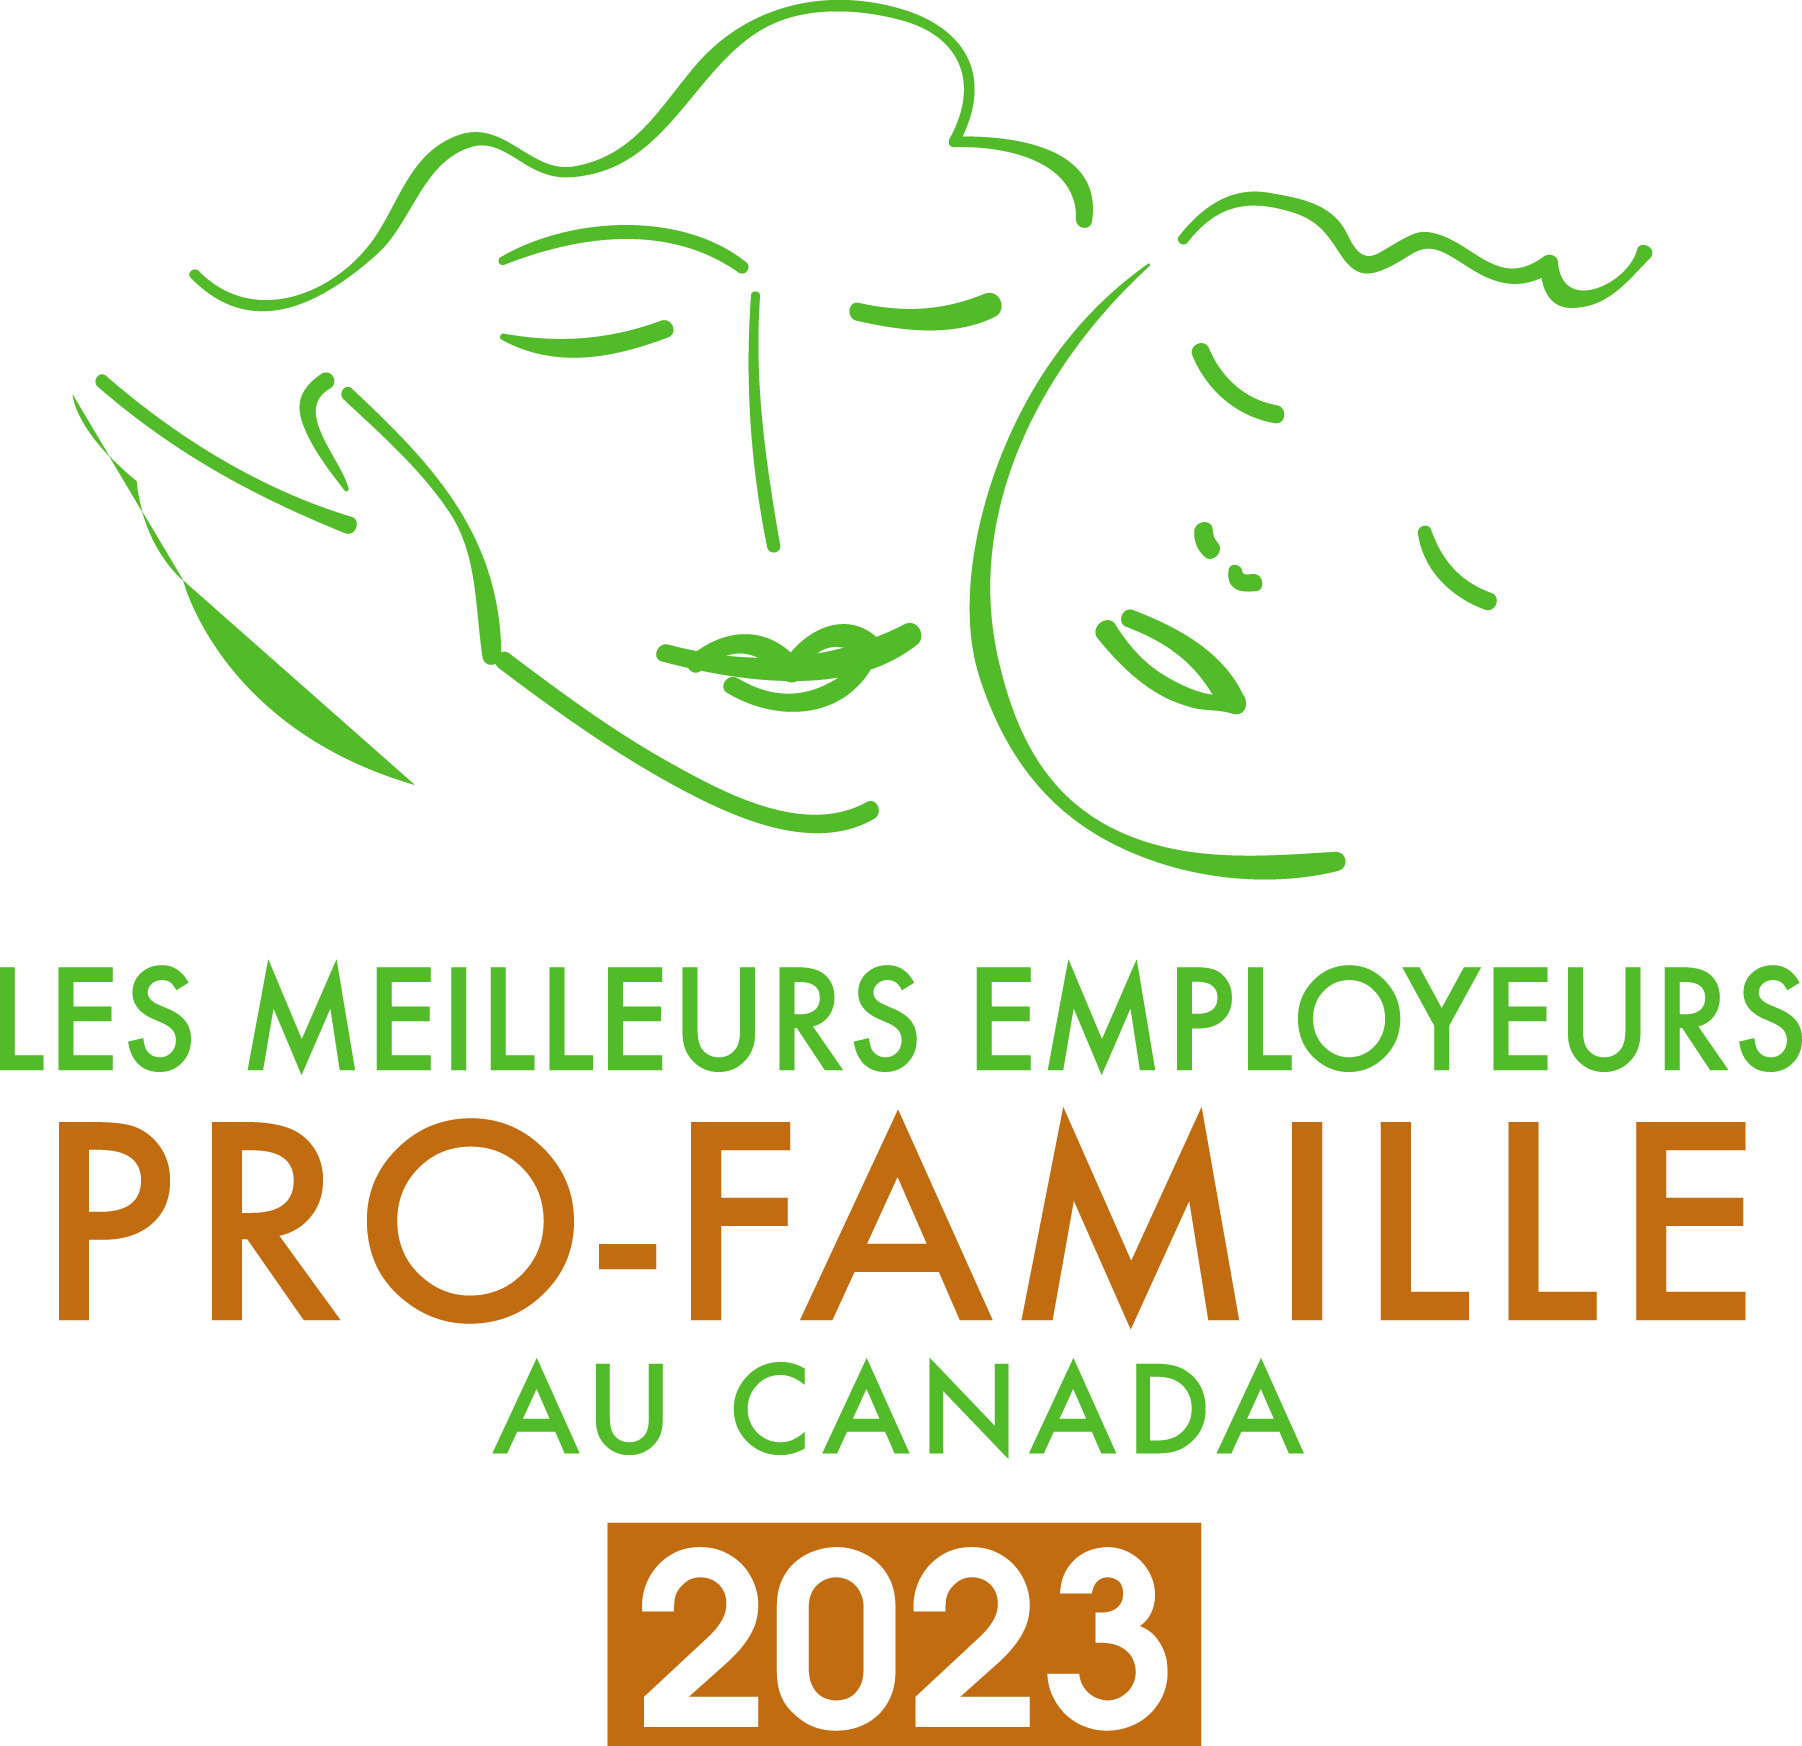 Canada's young employers 2020